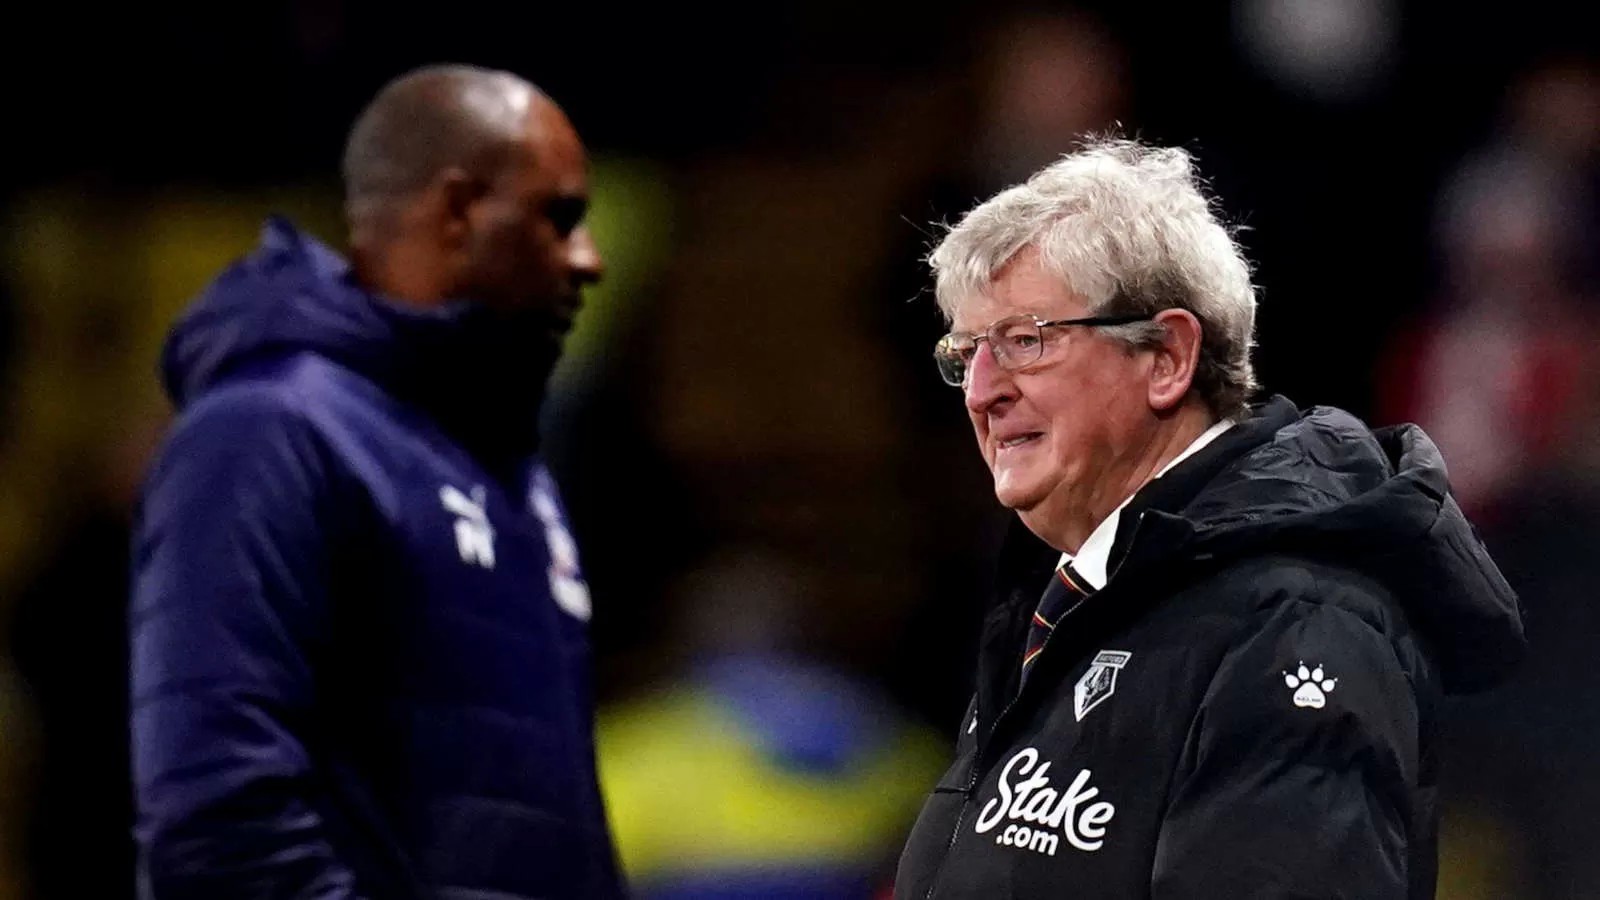 Crystal Palace and Roy Hodgson: a sign of panic at Selhurst Park or back to the future?